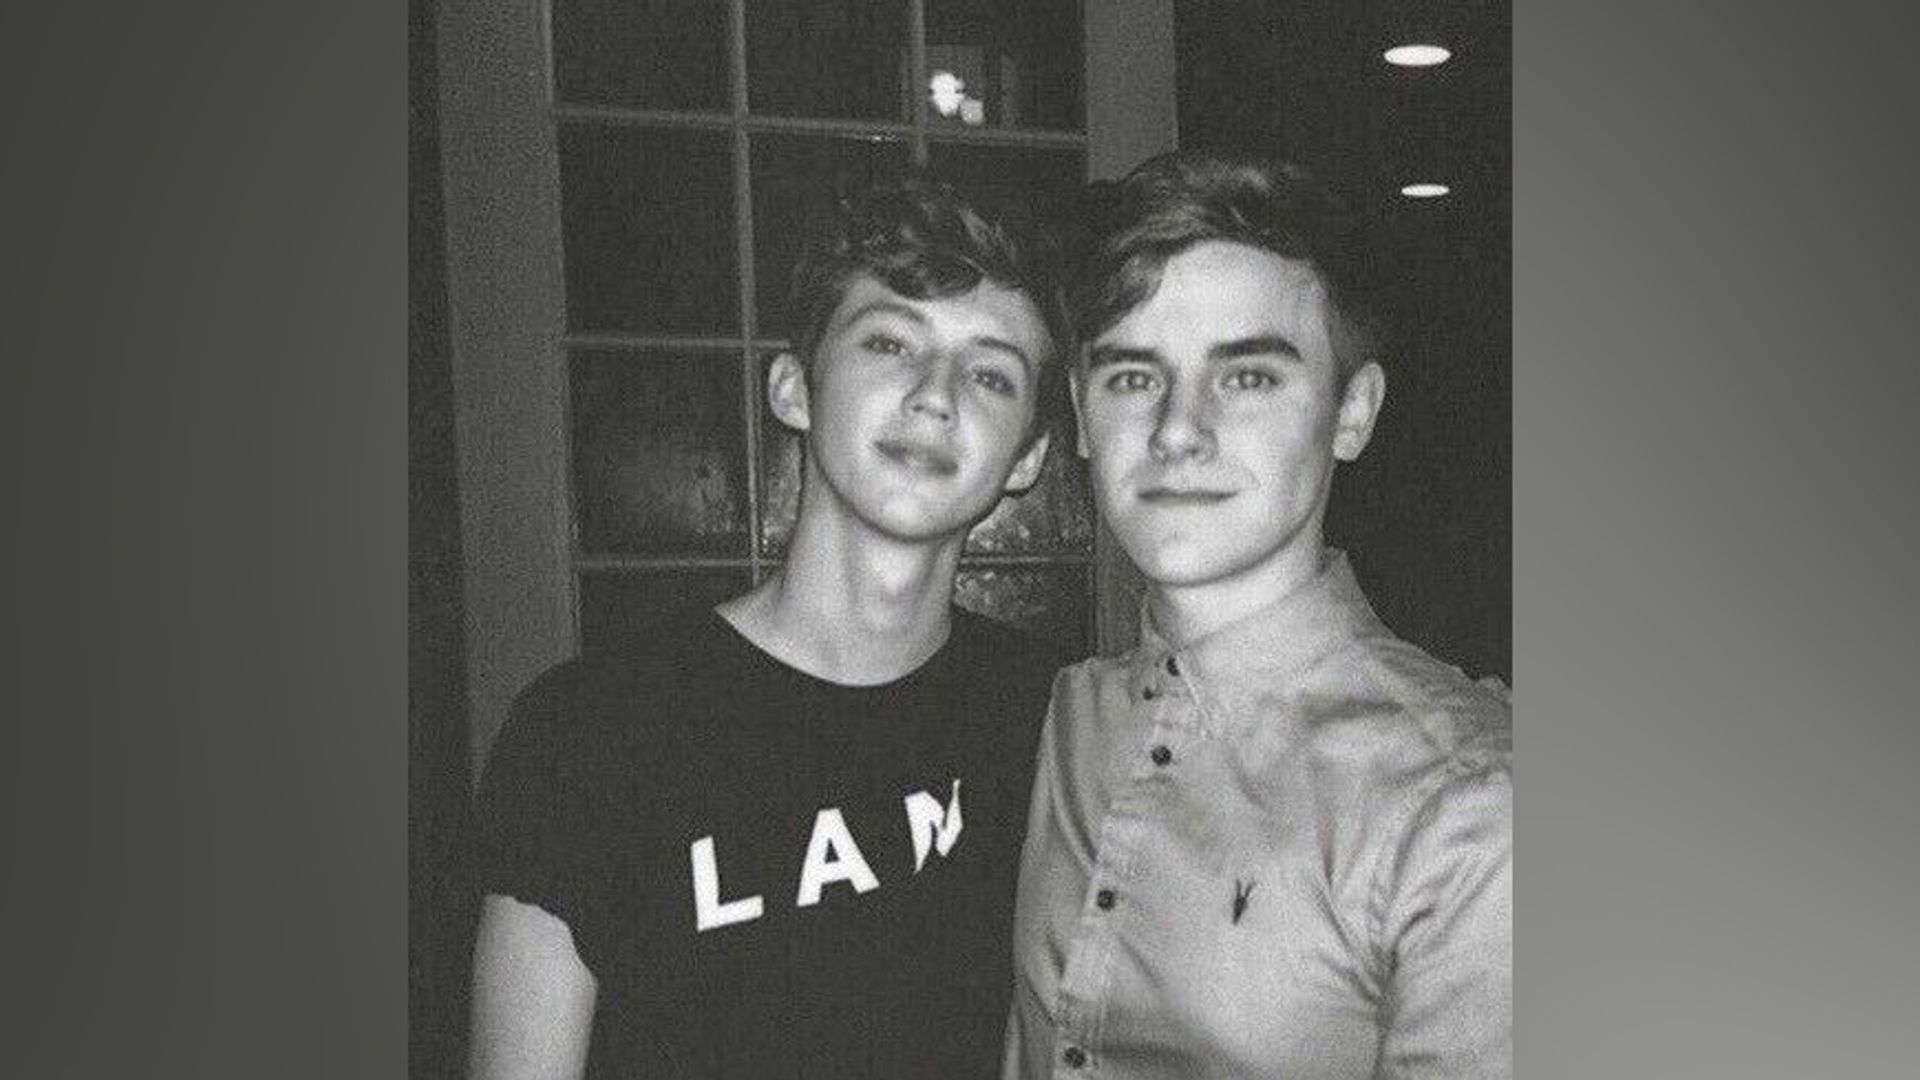 Troye Sivan and Connor Franta